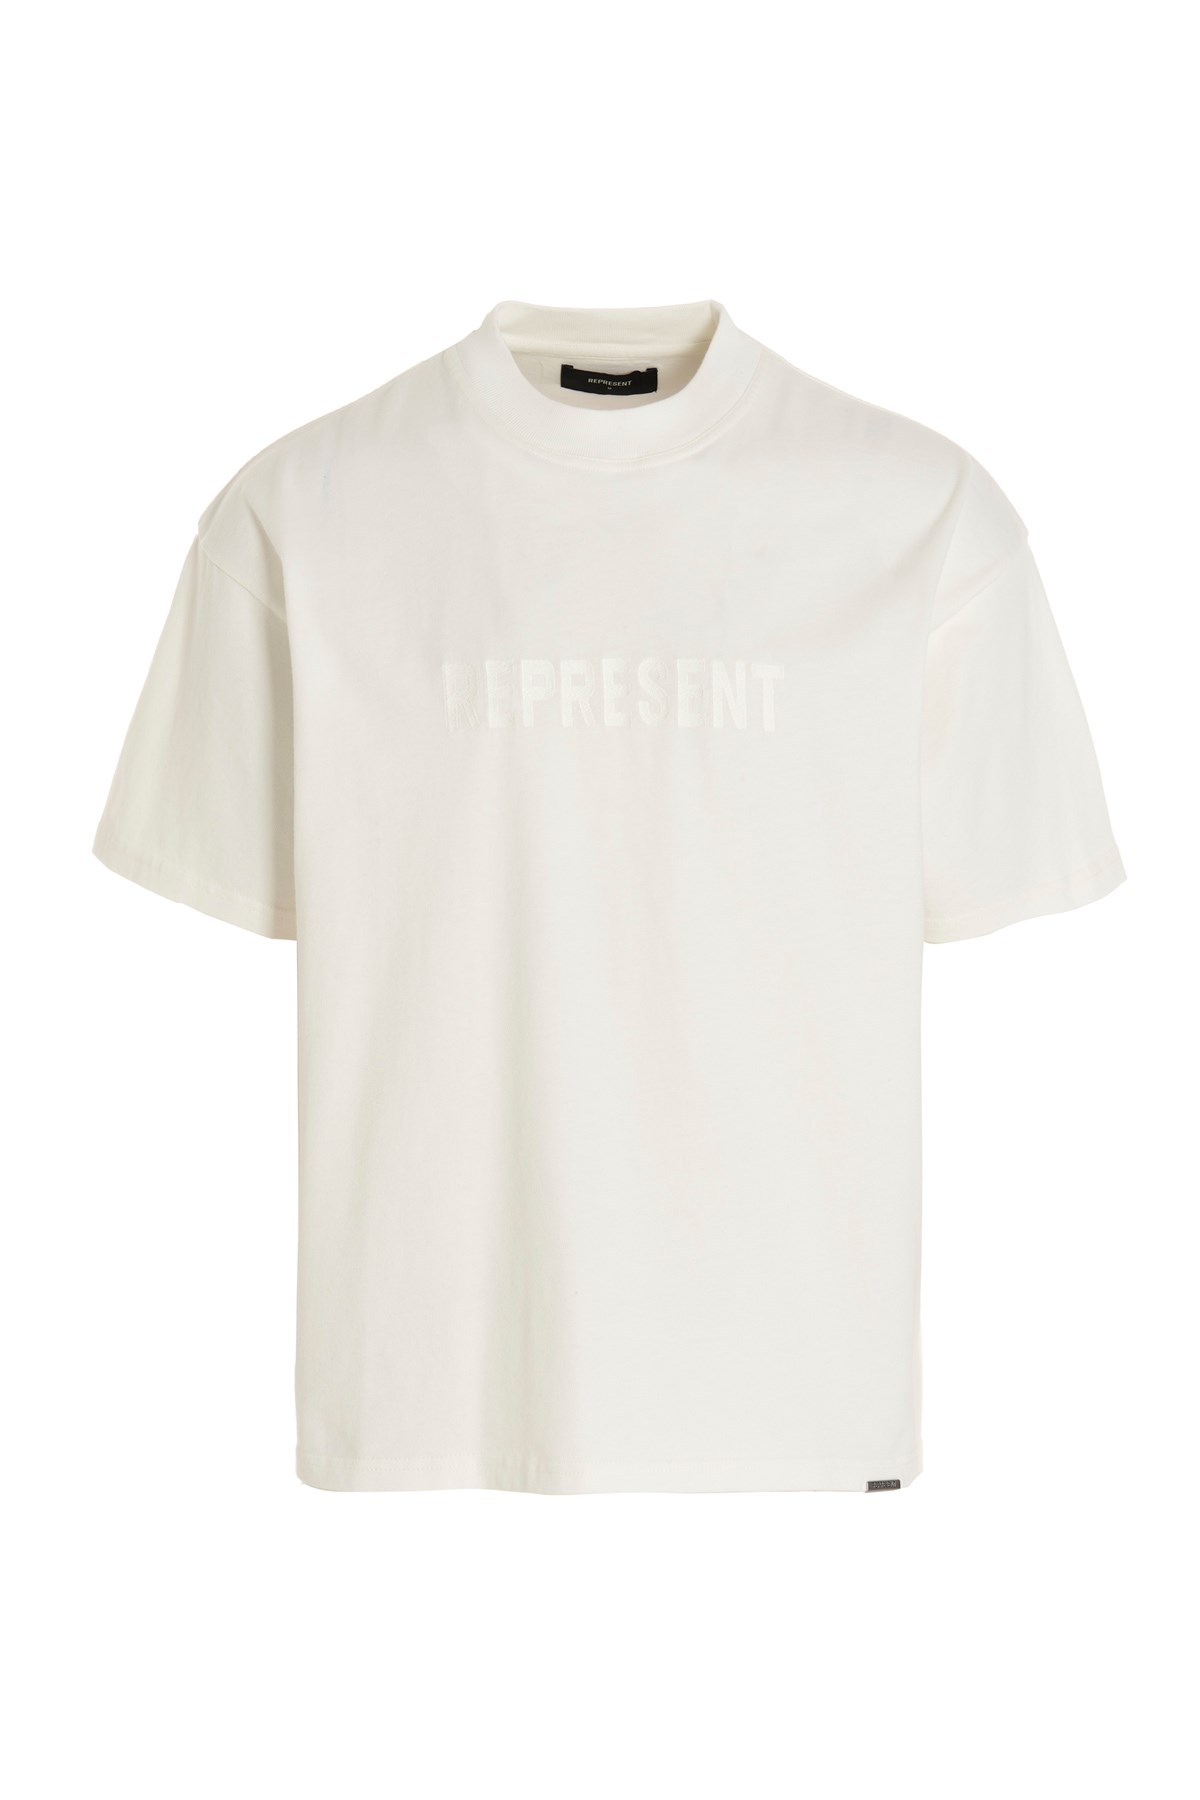 REPRESENT 'Embroidered Logo’ T-Shirt